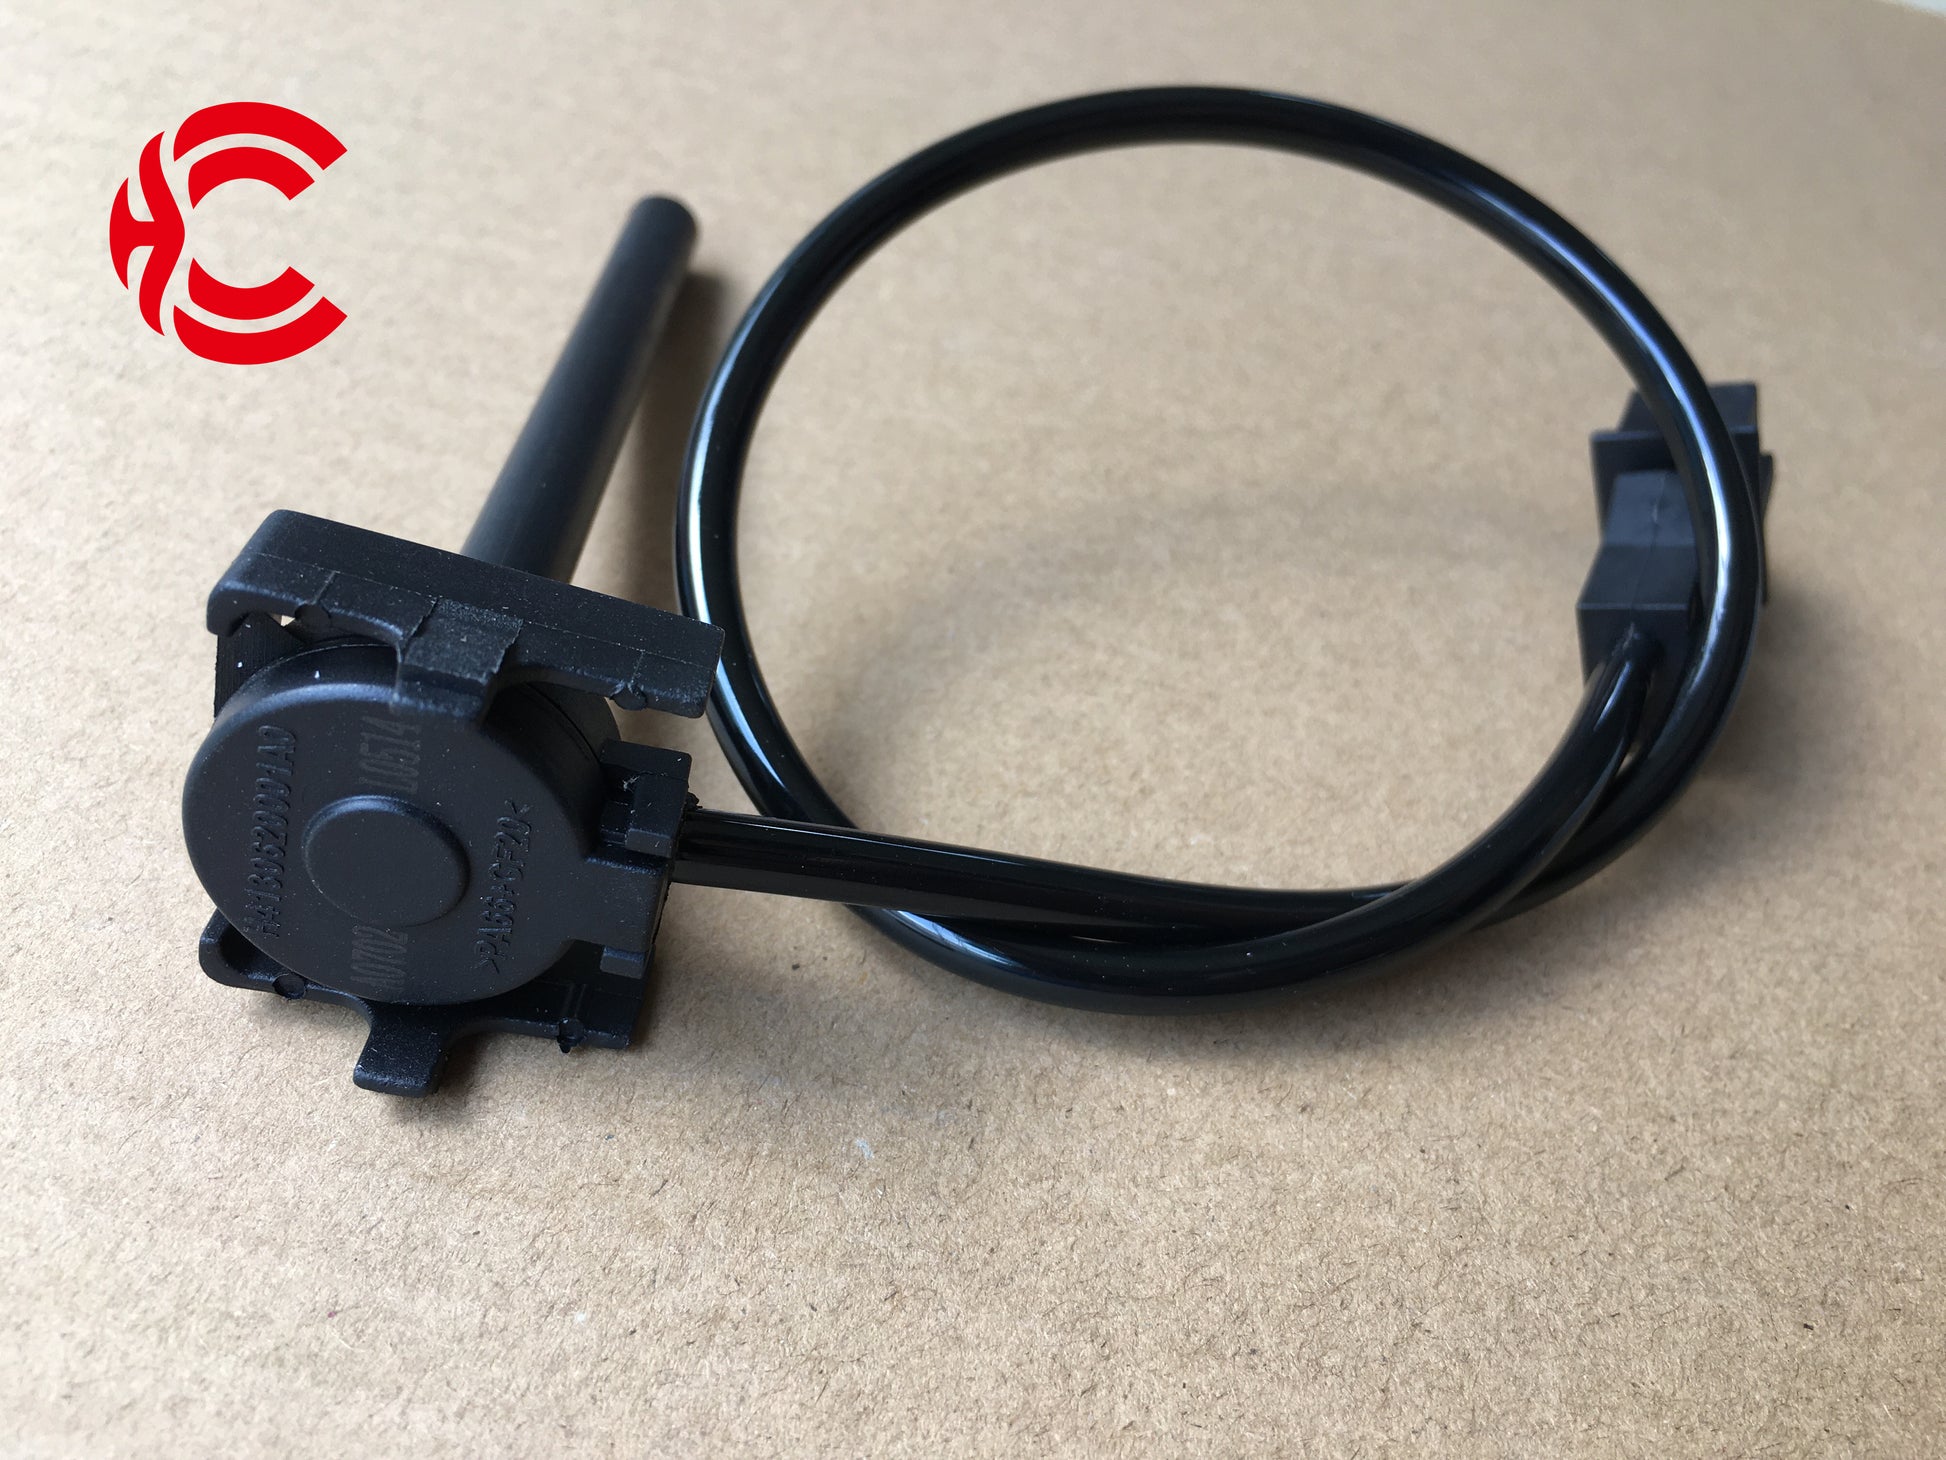 OEM: H4130620001A0 FOTON AUMANMaterial: ABS metalColor: Black GoldenOrigin: Made in ChinaWeight: 50gPacking List: 1* Coolant Level Alarm Sensor More ServiceWe can provide OEM Manufacturing serviceWe can Be your one-step solution for Auto PartsWe can provide technical scheme for you Feel Free to Contact Us, we will get back to you as soon as possible.